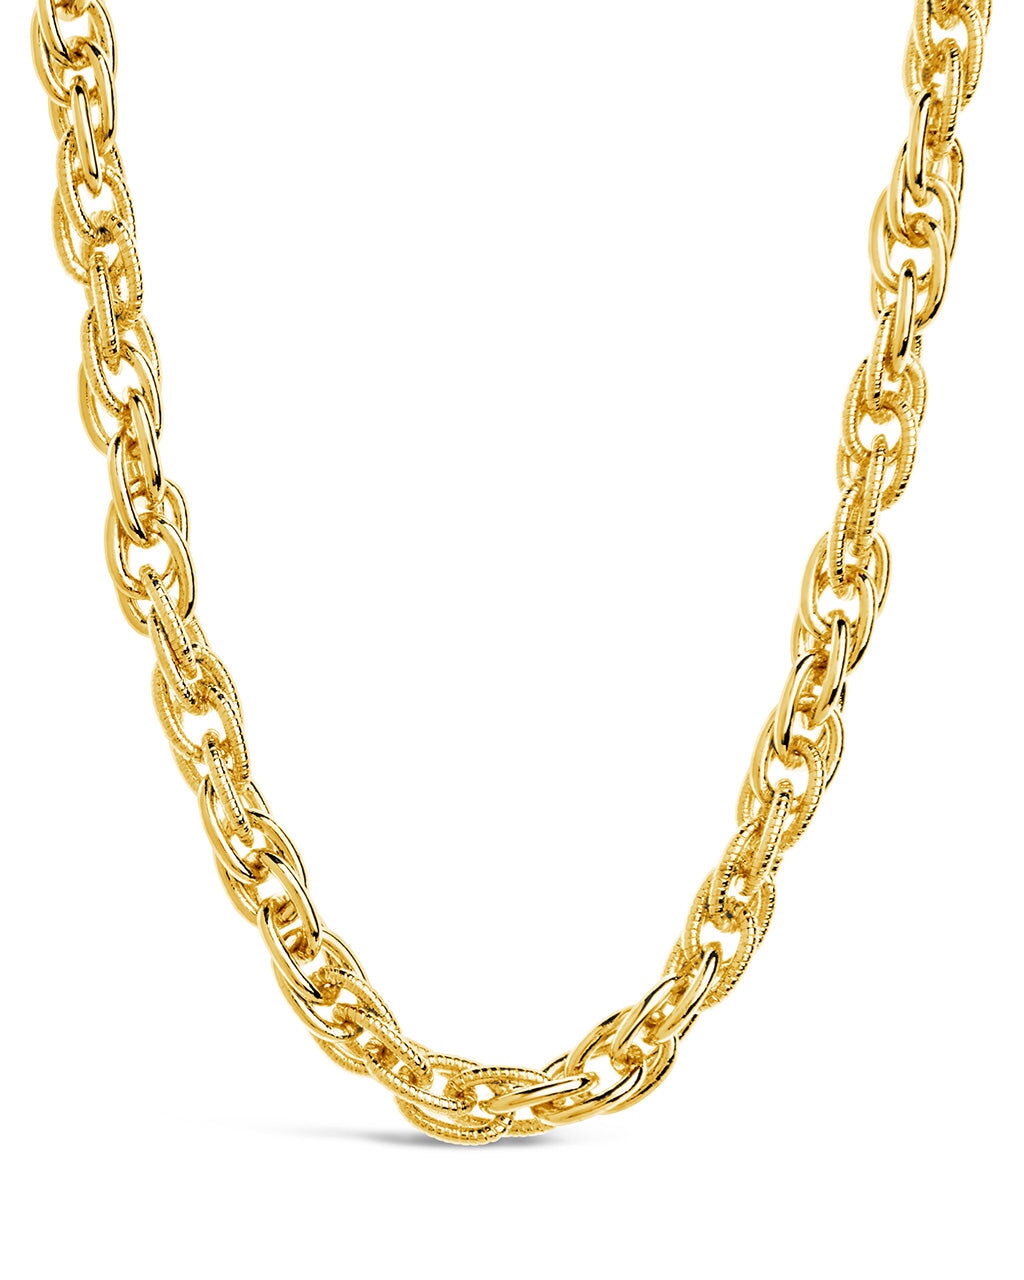 Alex Chain Necklace Necklace Sterling Forever Gold 